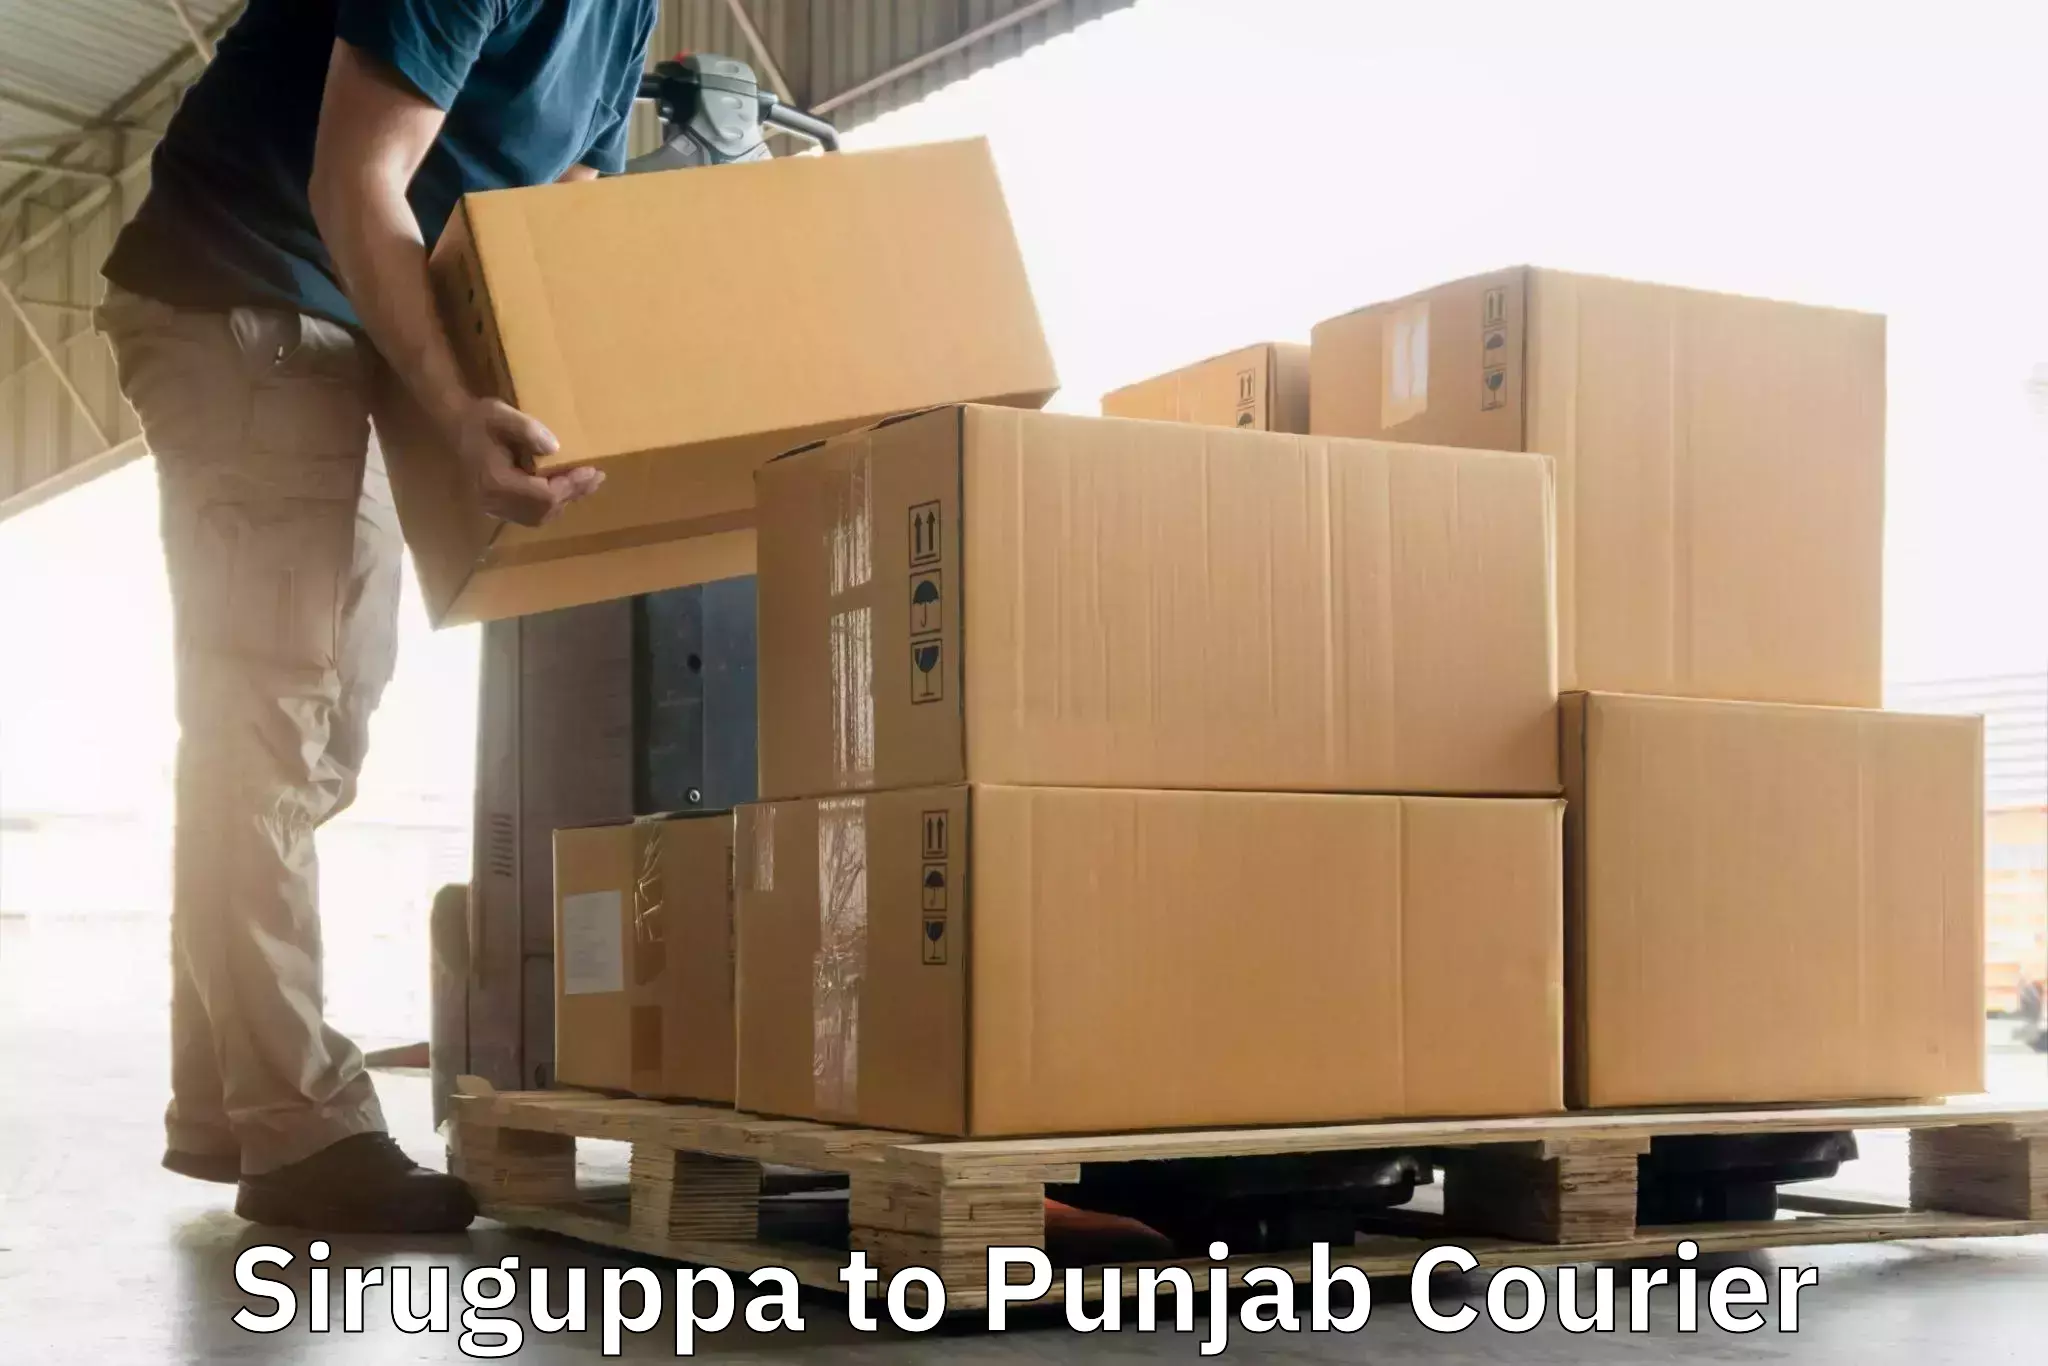 Next-generation courier services Siruguppa to Jalalabad